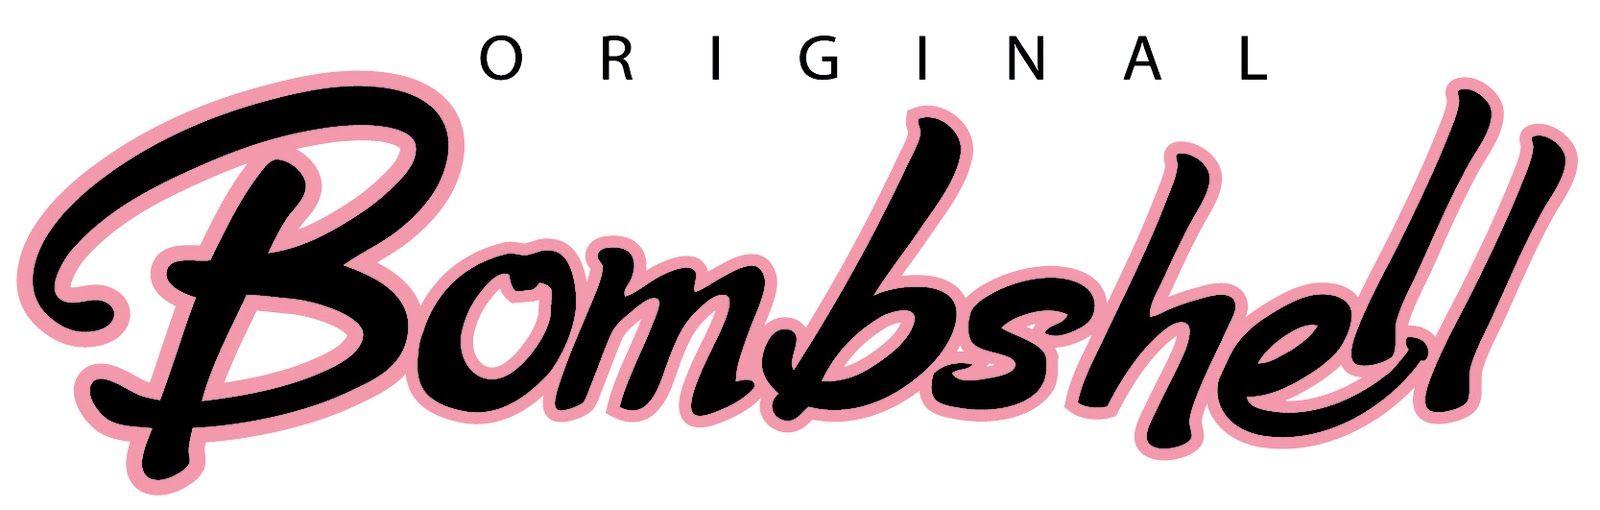 Bombshell Logo - Welcome to the Official Original Bombshell Blog!!!: The Official ...